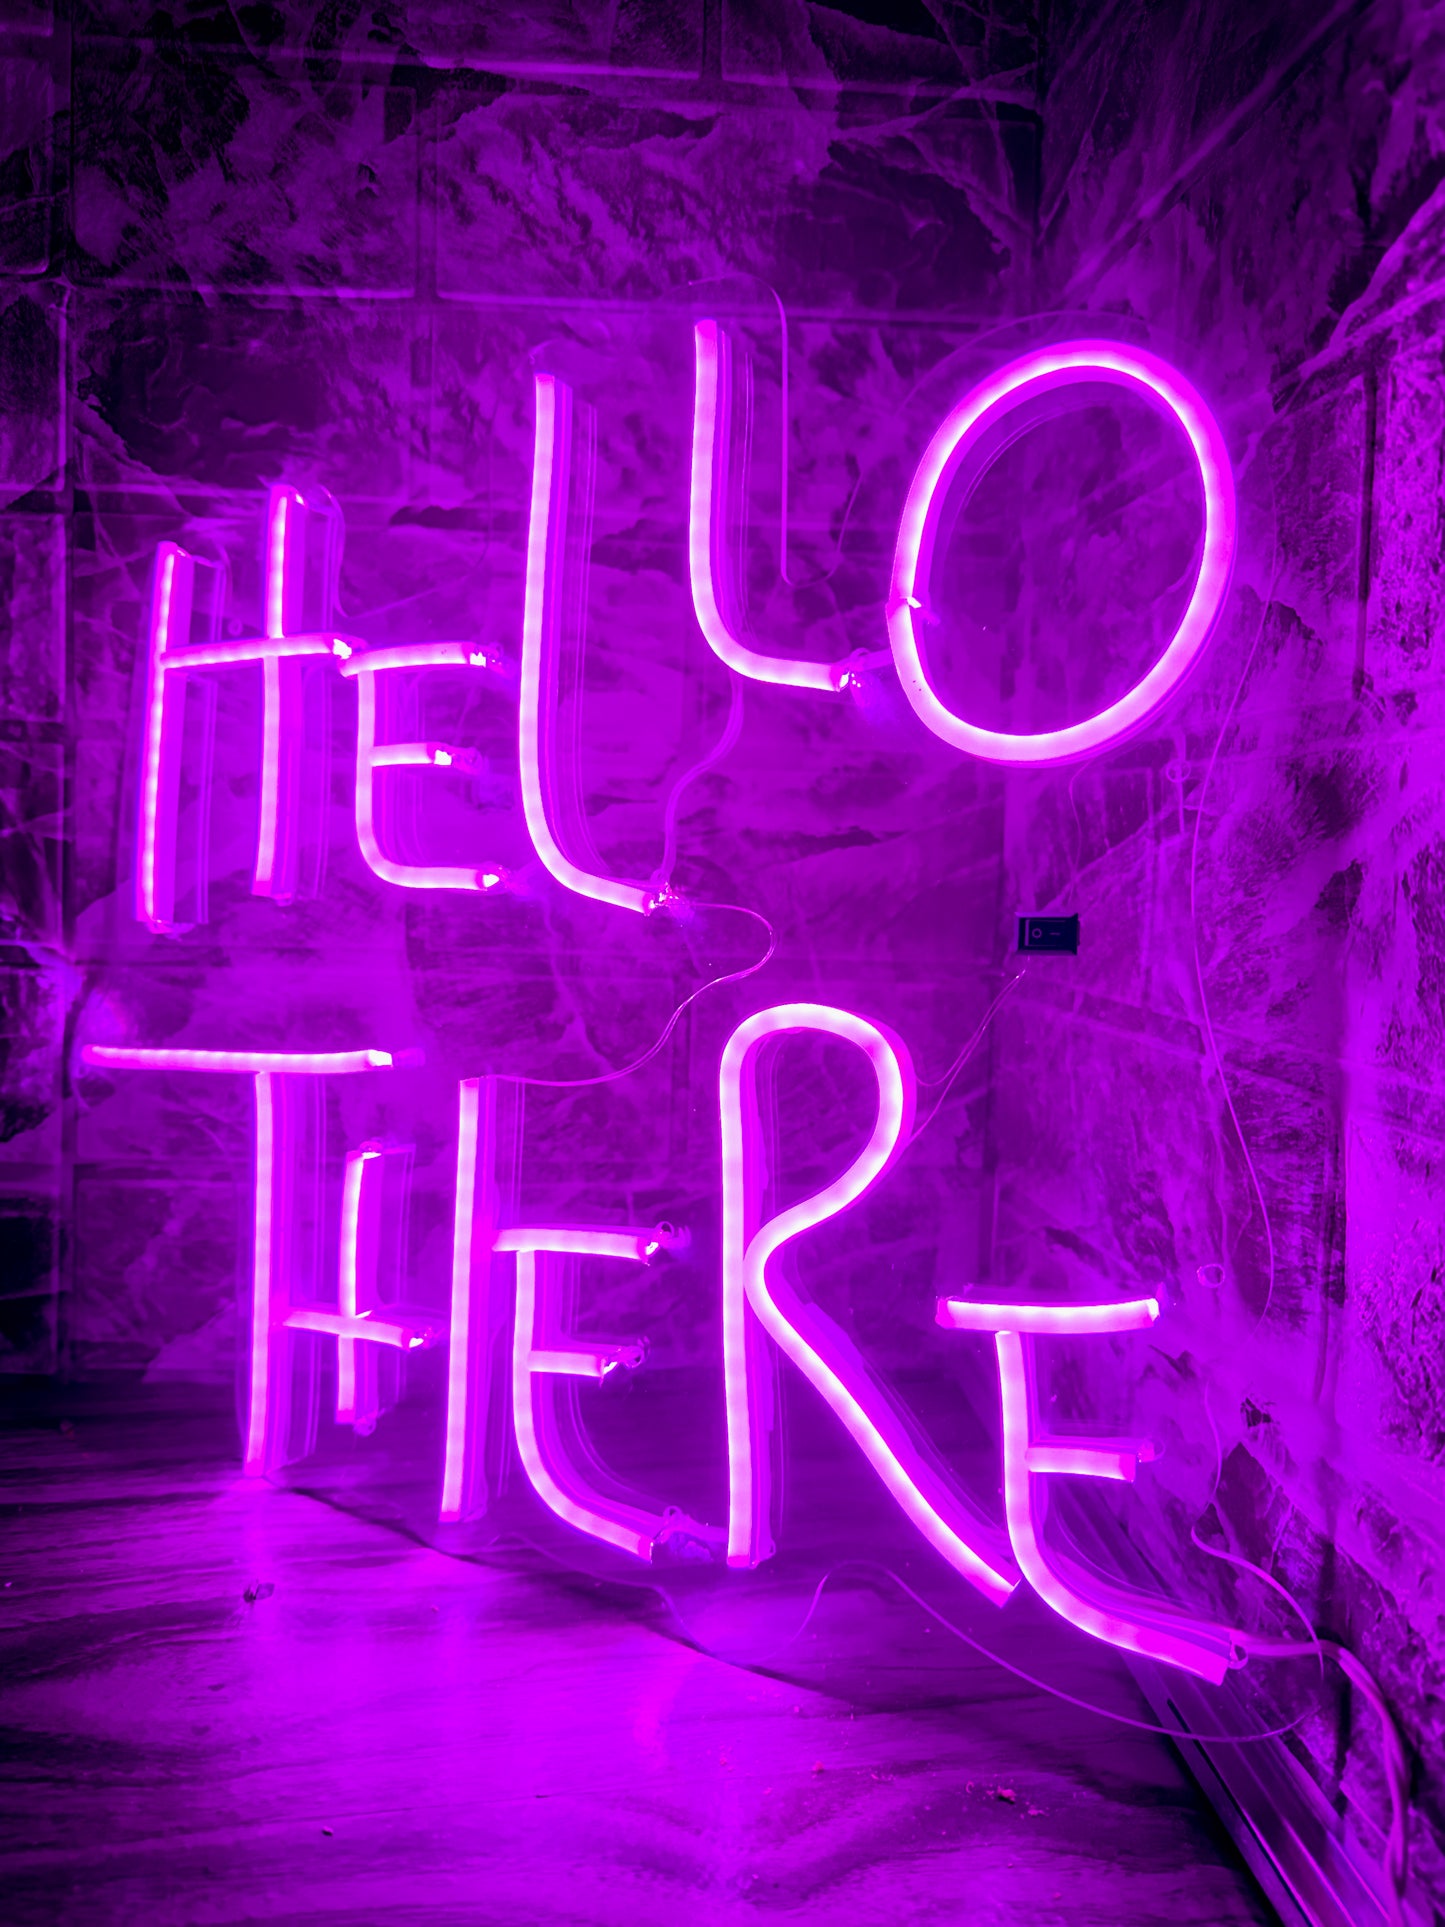 Letrero Neon Hello There/ Hell Here Palabras Intercambiables